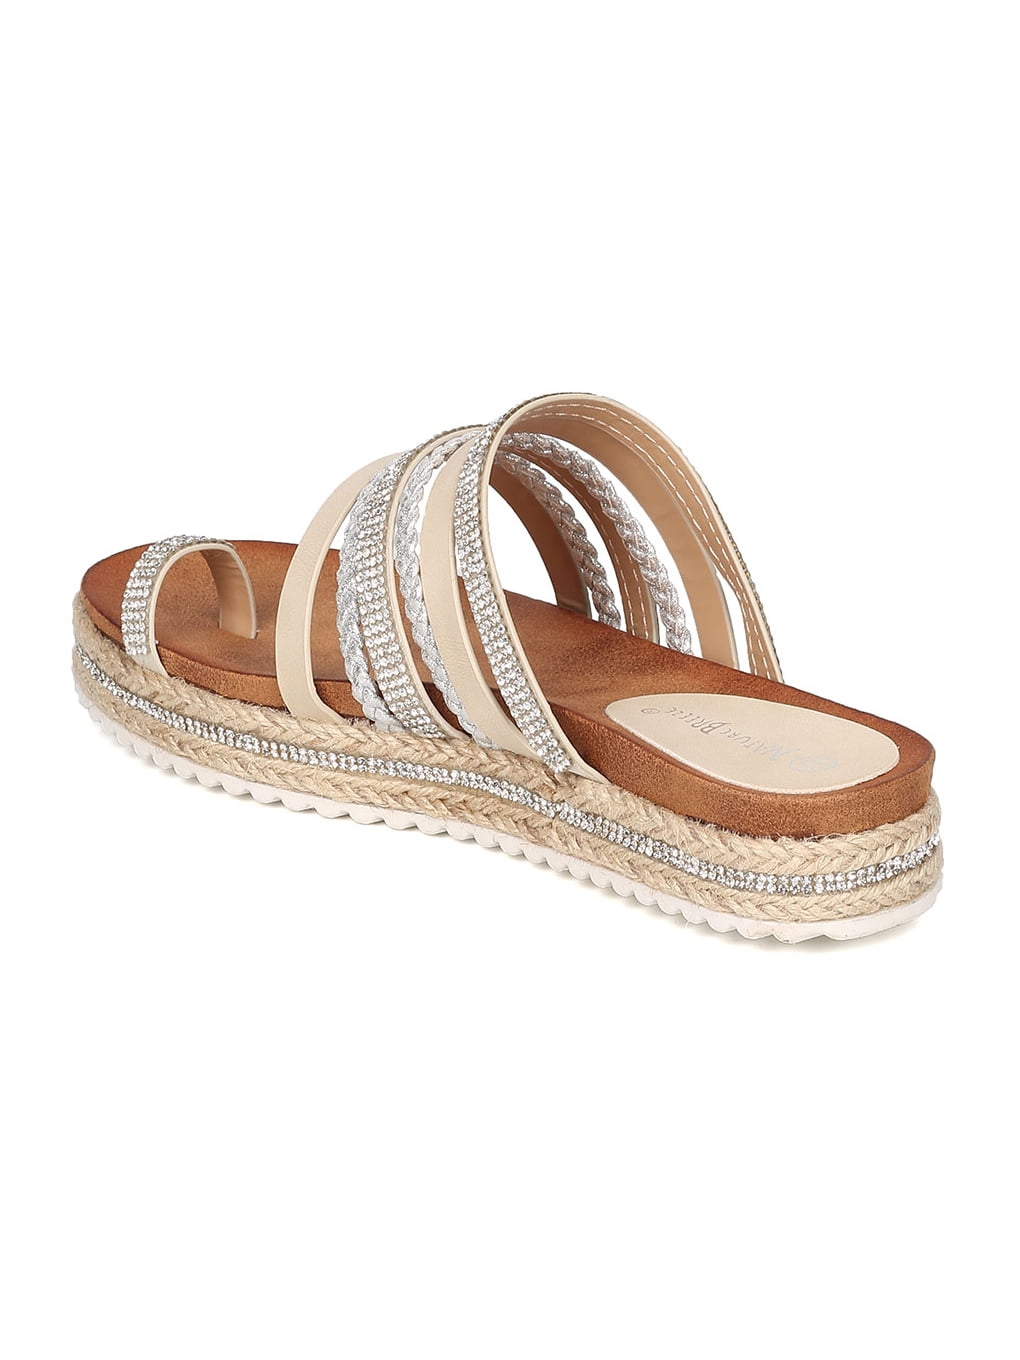 New Women Nature Breeze Barclay01 Mixed Media Toe Ring Espadrille Footbed Sandal 